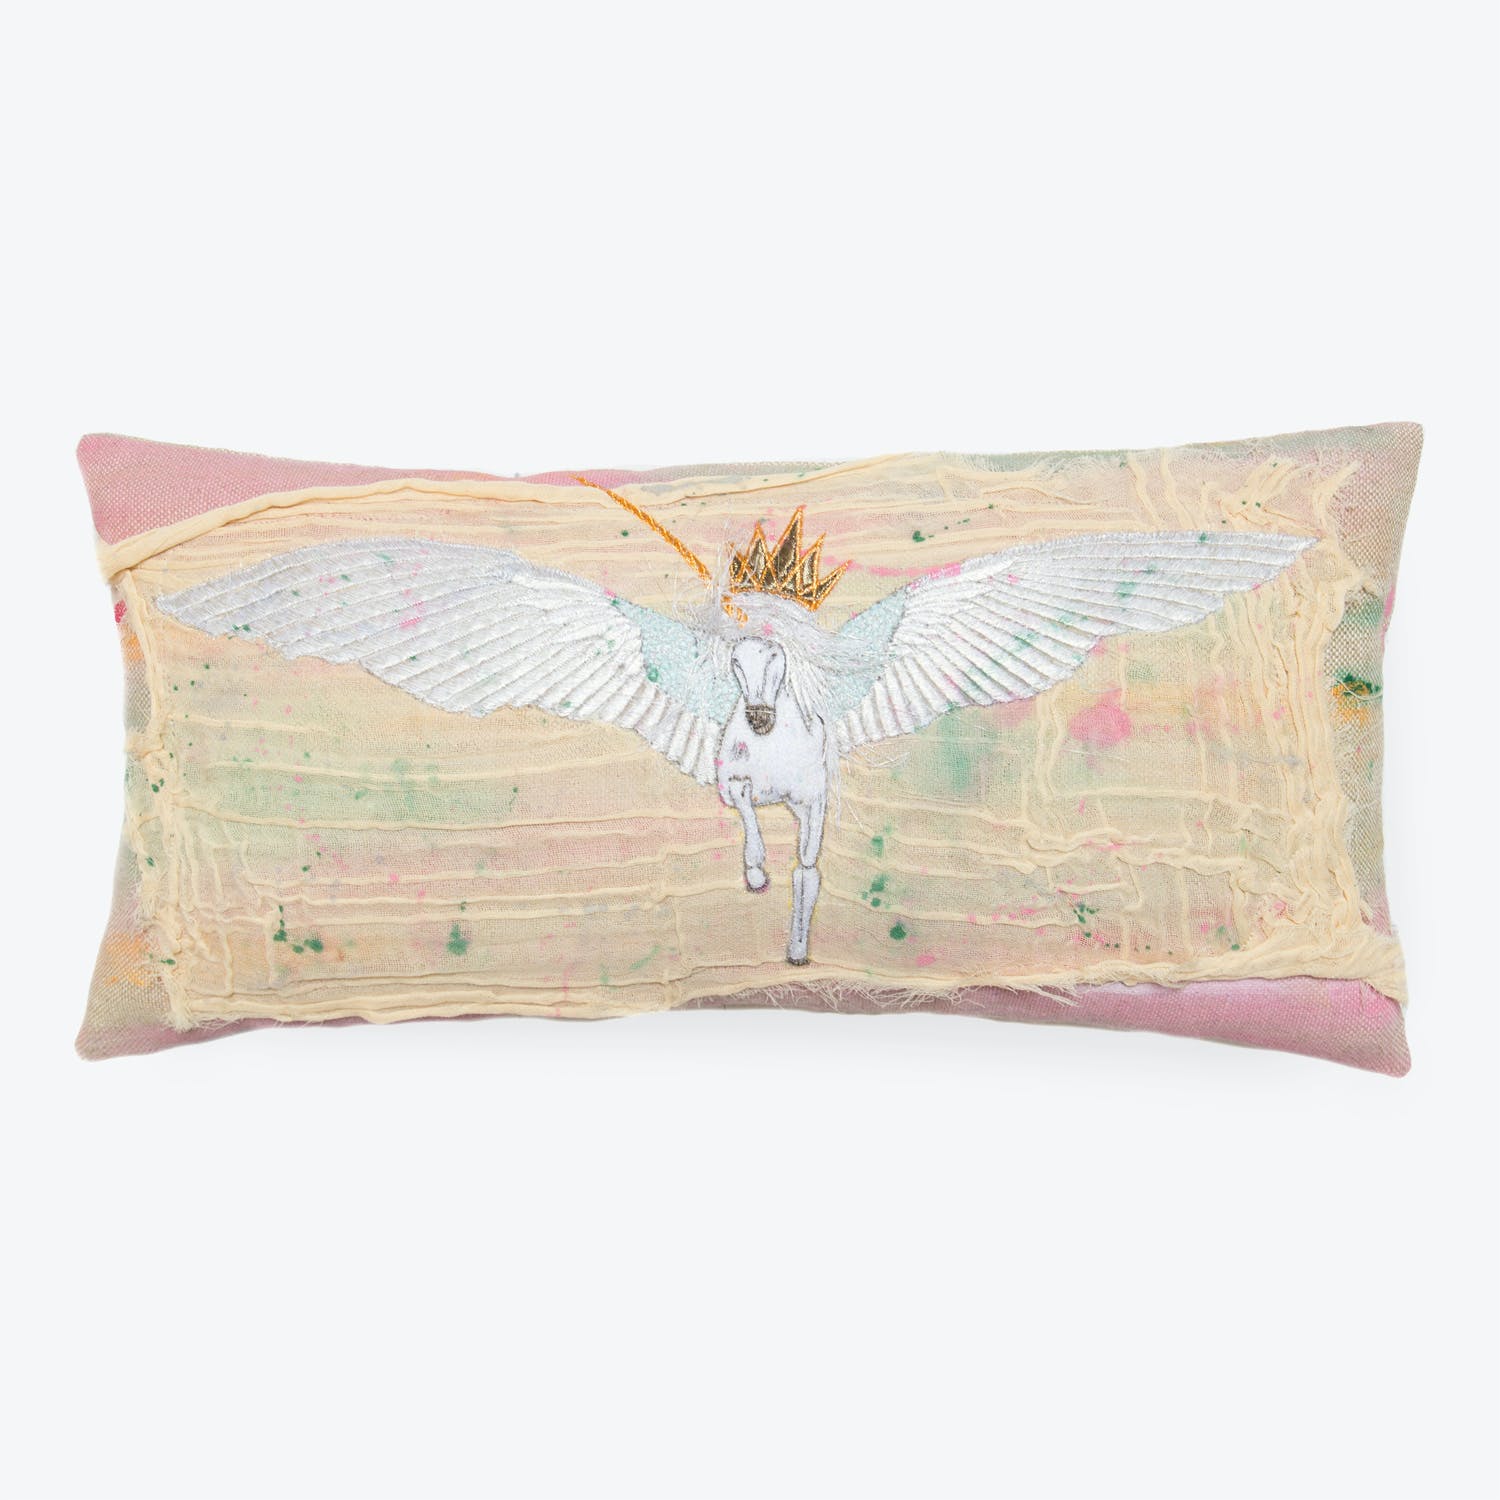 Whimsical unicorn pillow with majestic flying pose and golden crown.